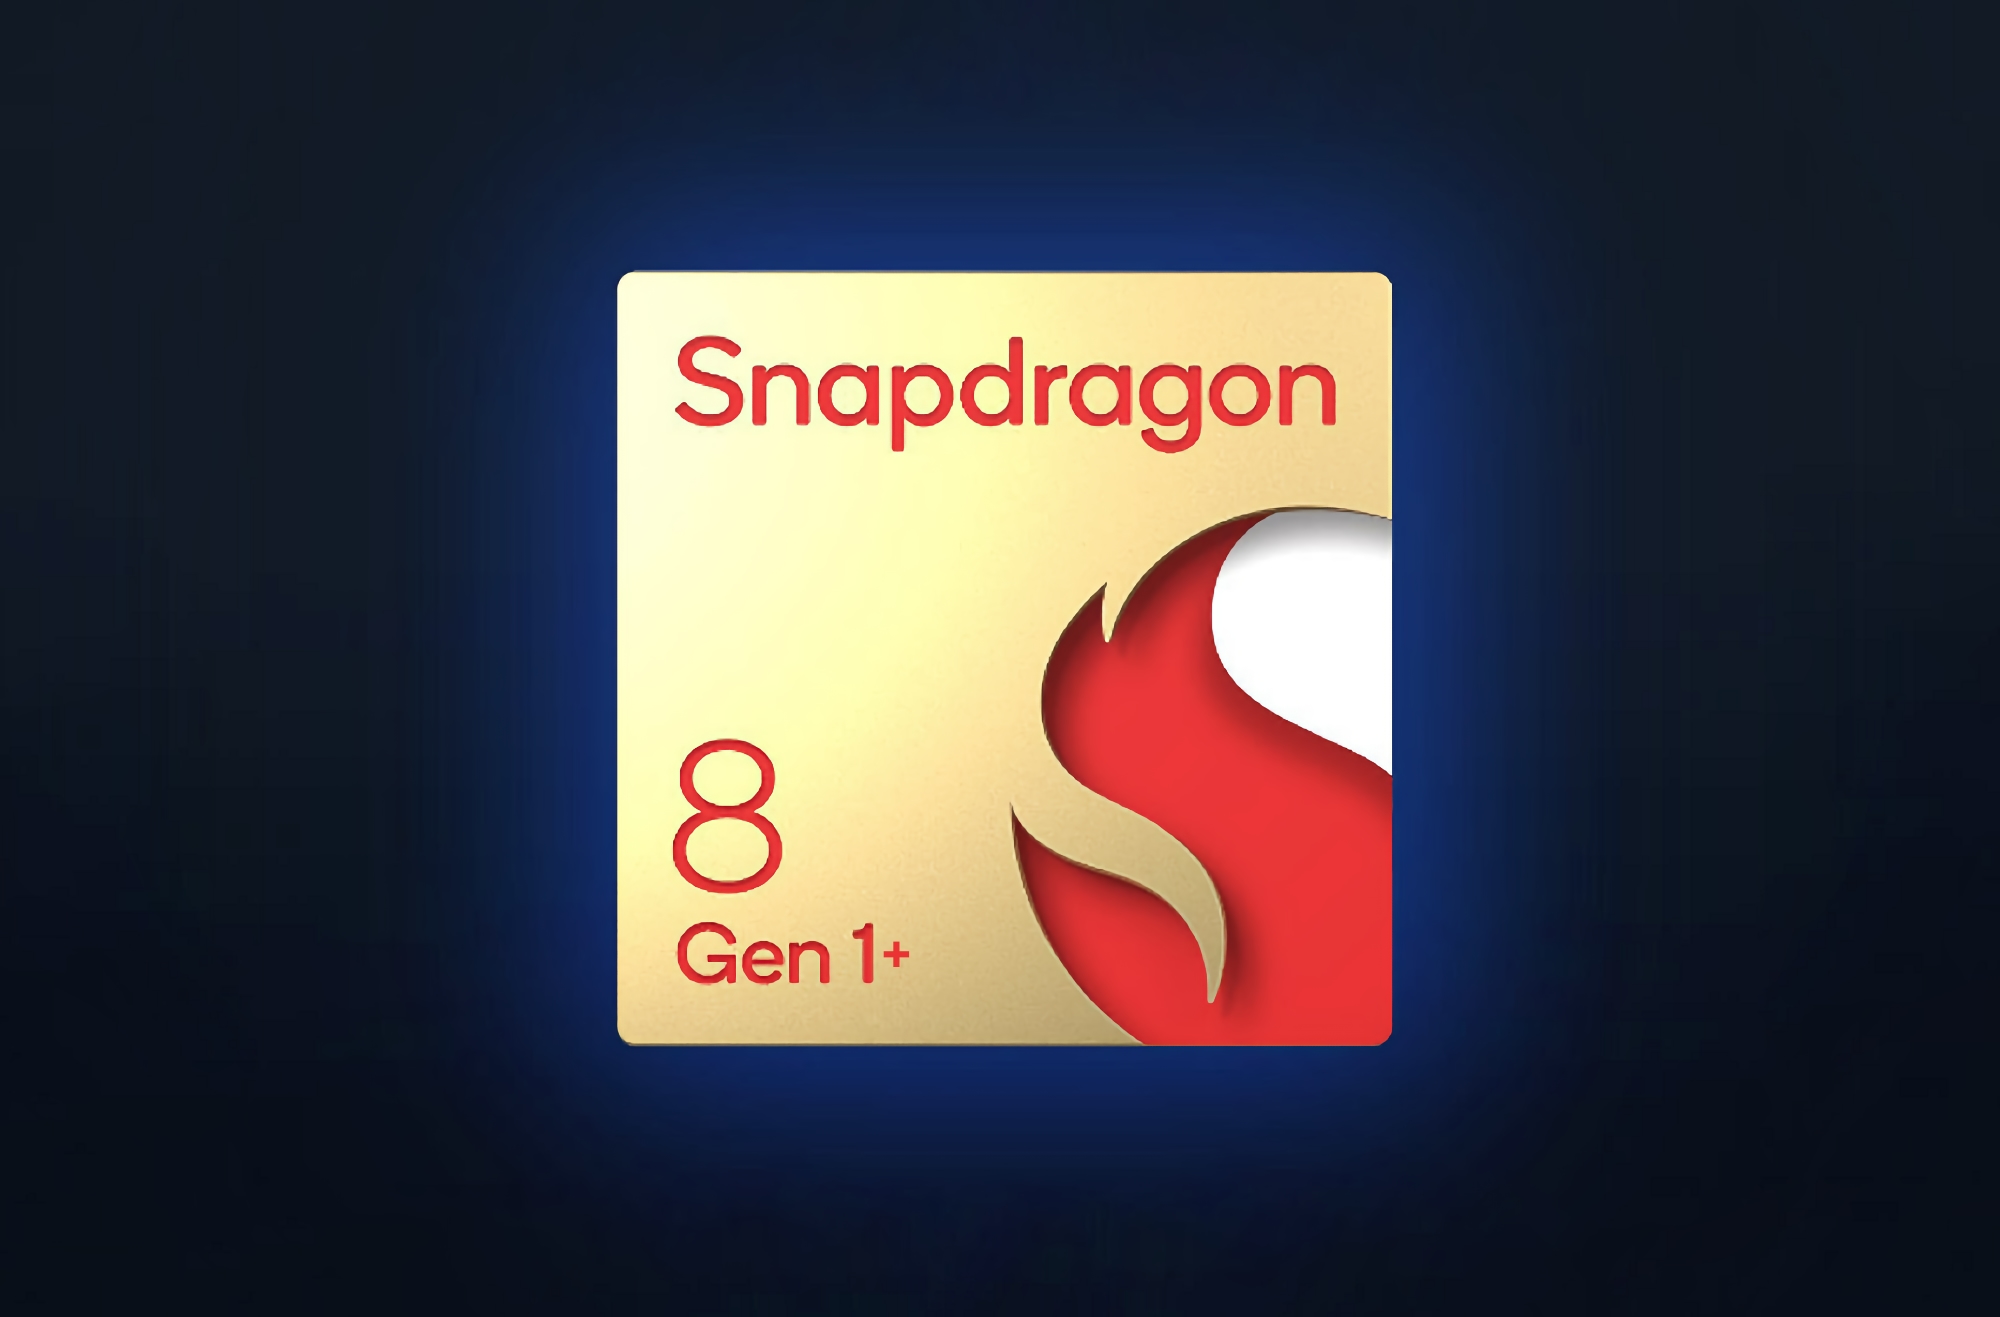 Insider: Qualcomm postponed the release of Snapdragon 8 Gen 1+ to the second half of 2022